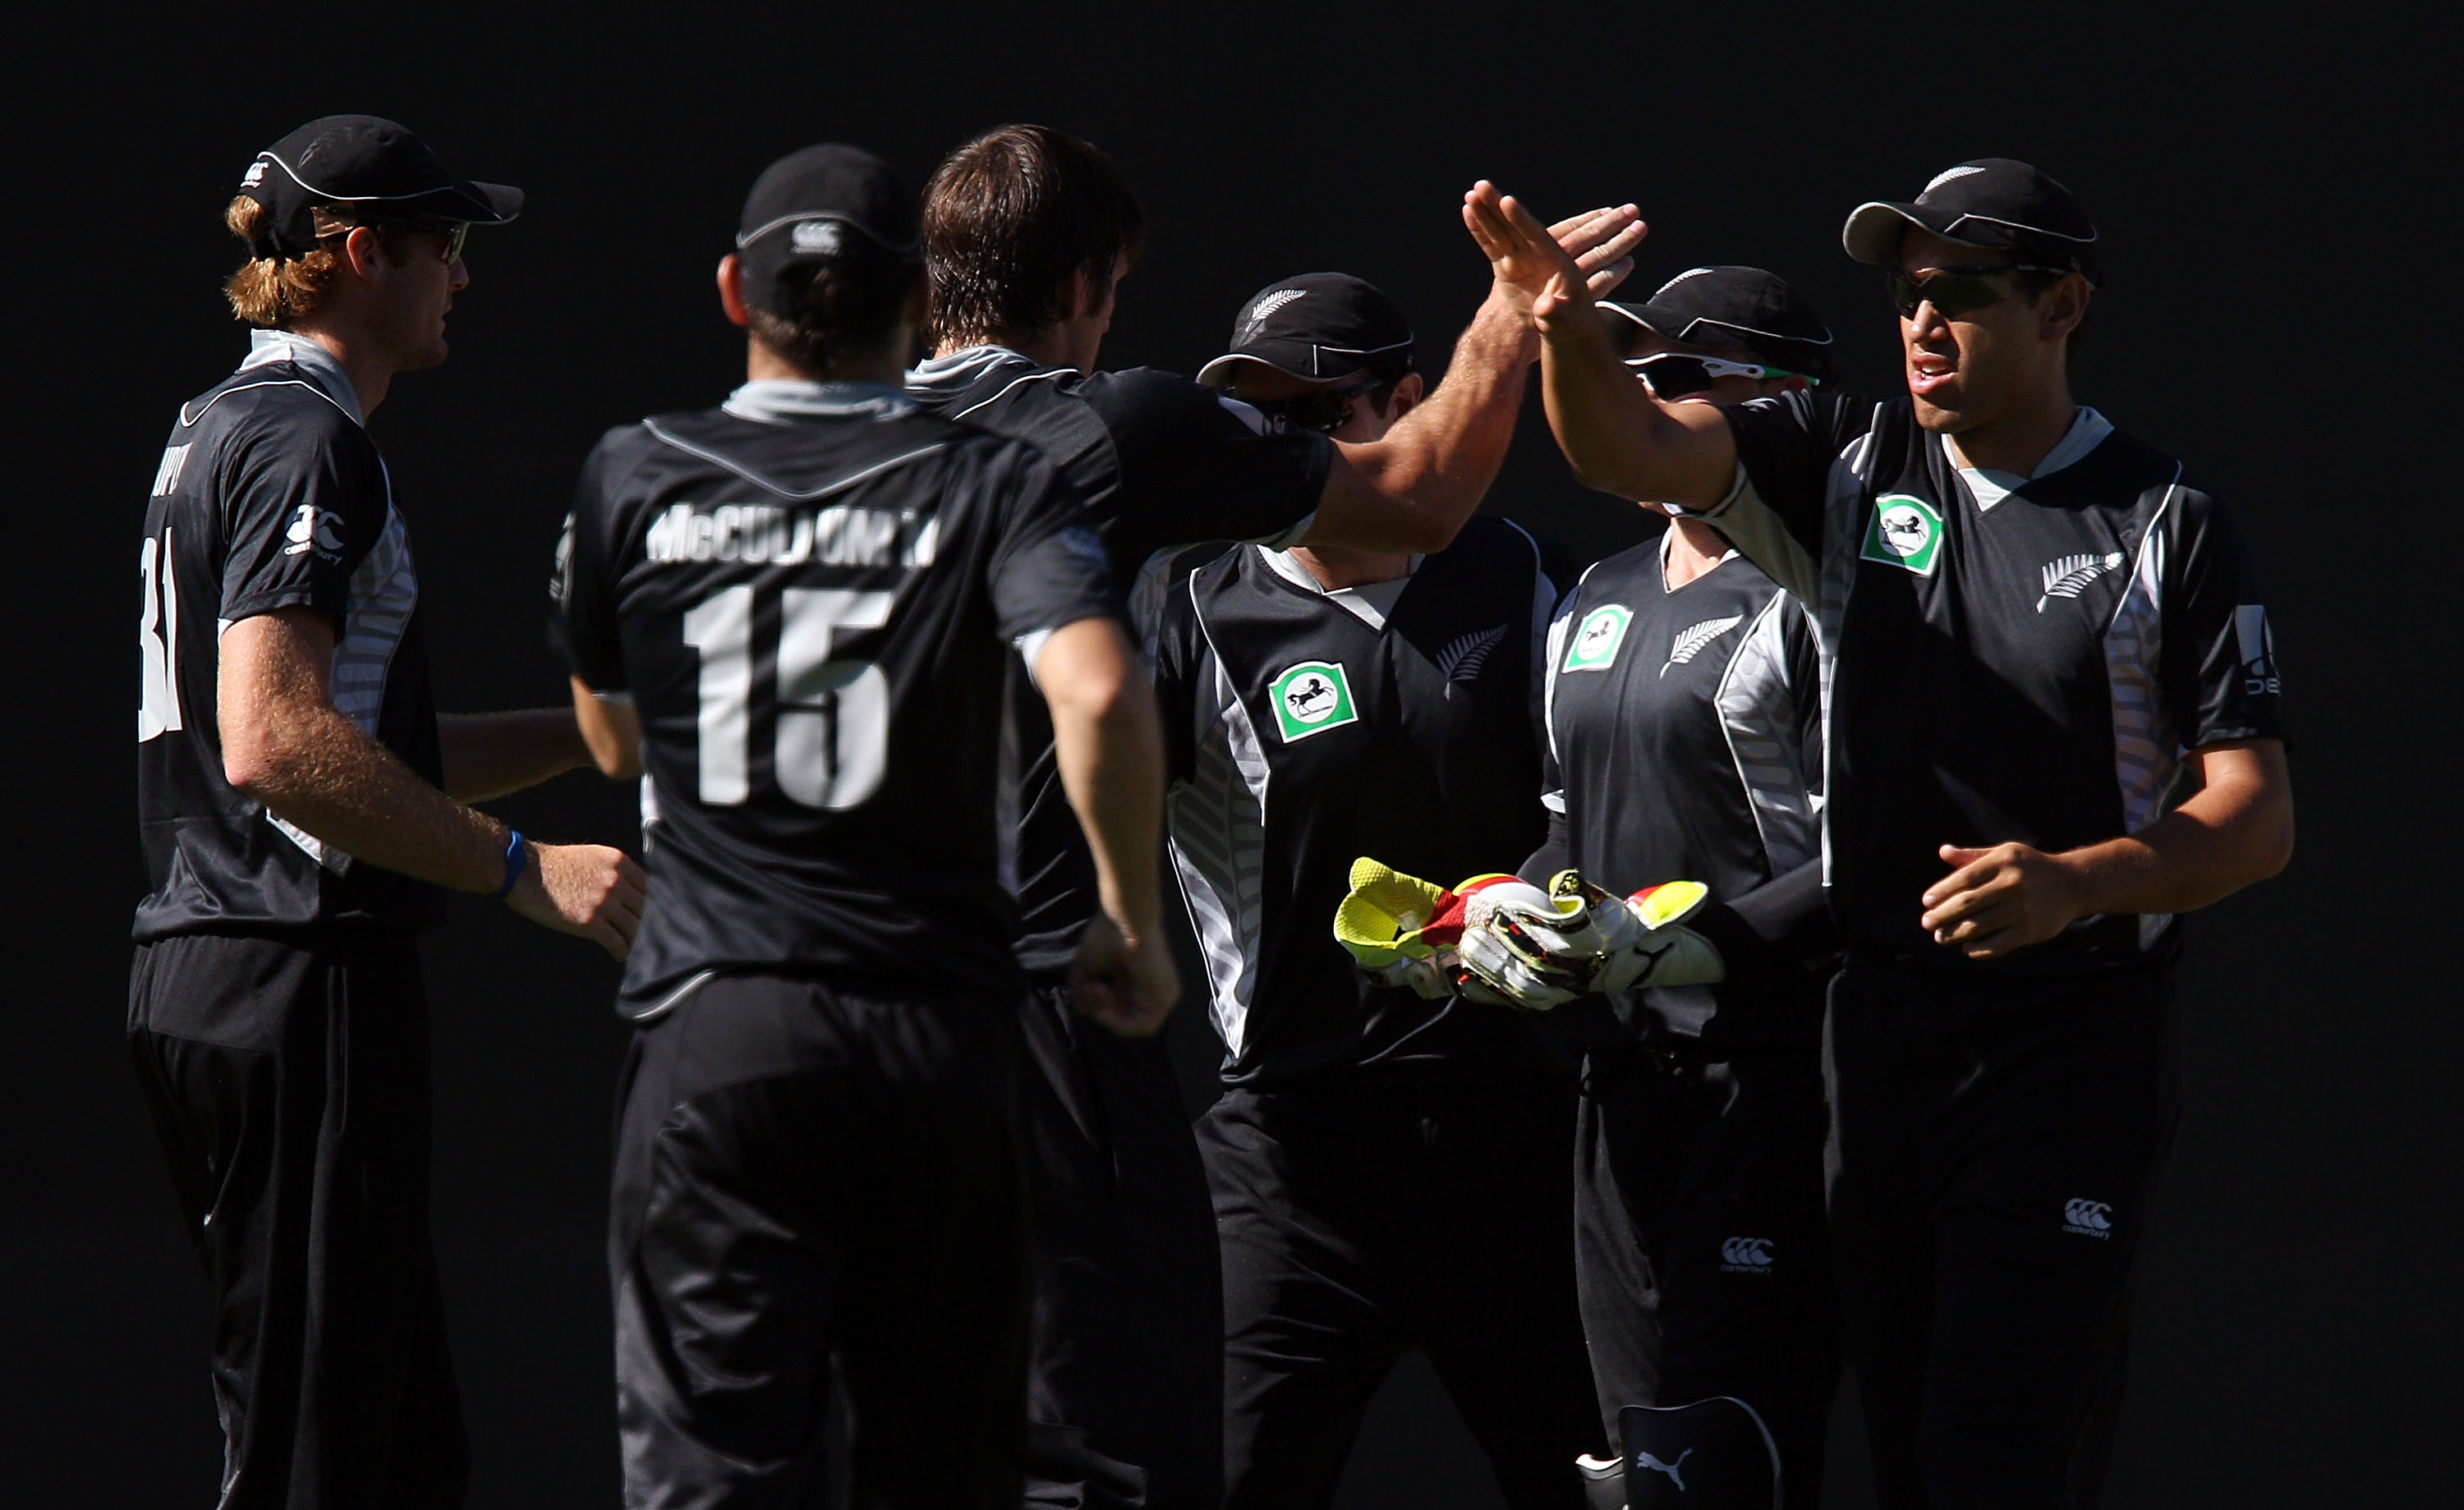 AUCKLAND, NEW ZEALAND - FEBRUARY 05:  Ross Taylor (R) of the Black Caps celebrates with Hamish Bennett after taking the wicket of Younis Khan of Pakistan during game six of the one day series between New Zealand and Pakistan at Eden Park on February 5, 20